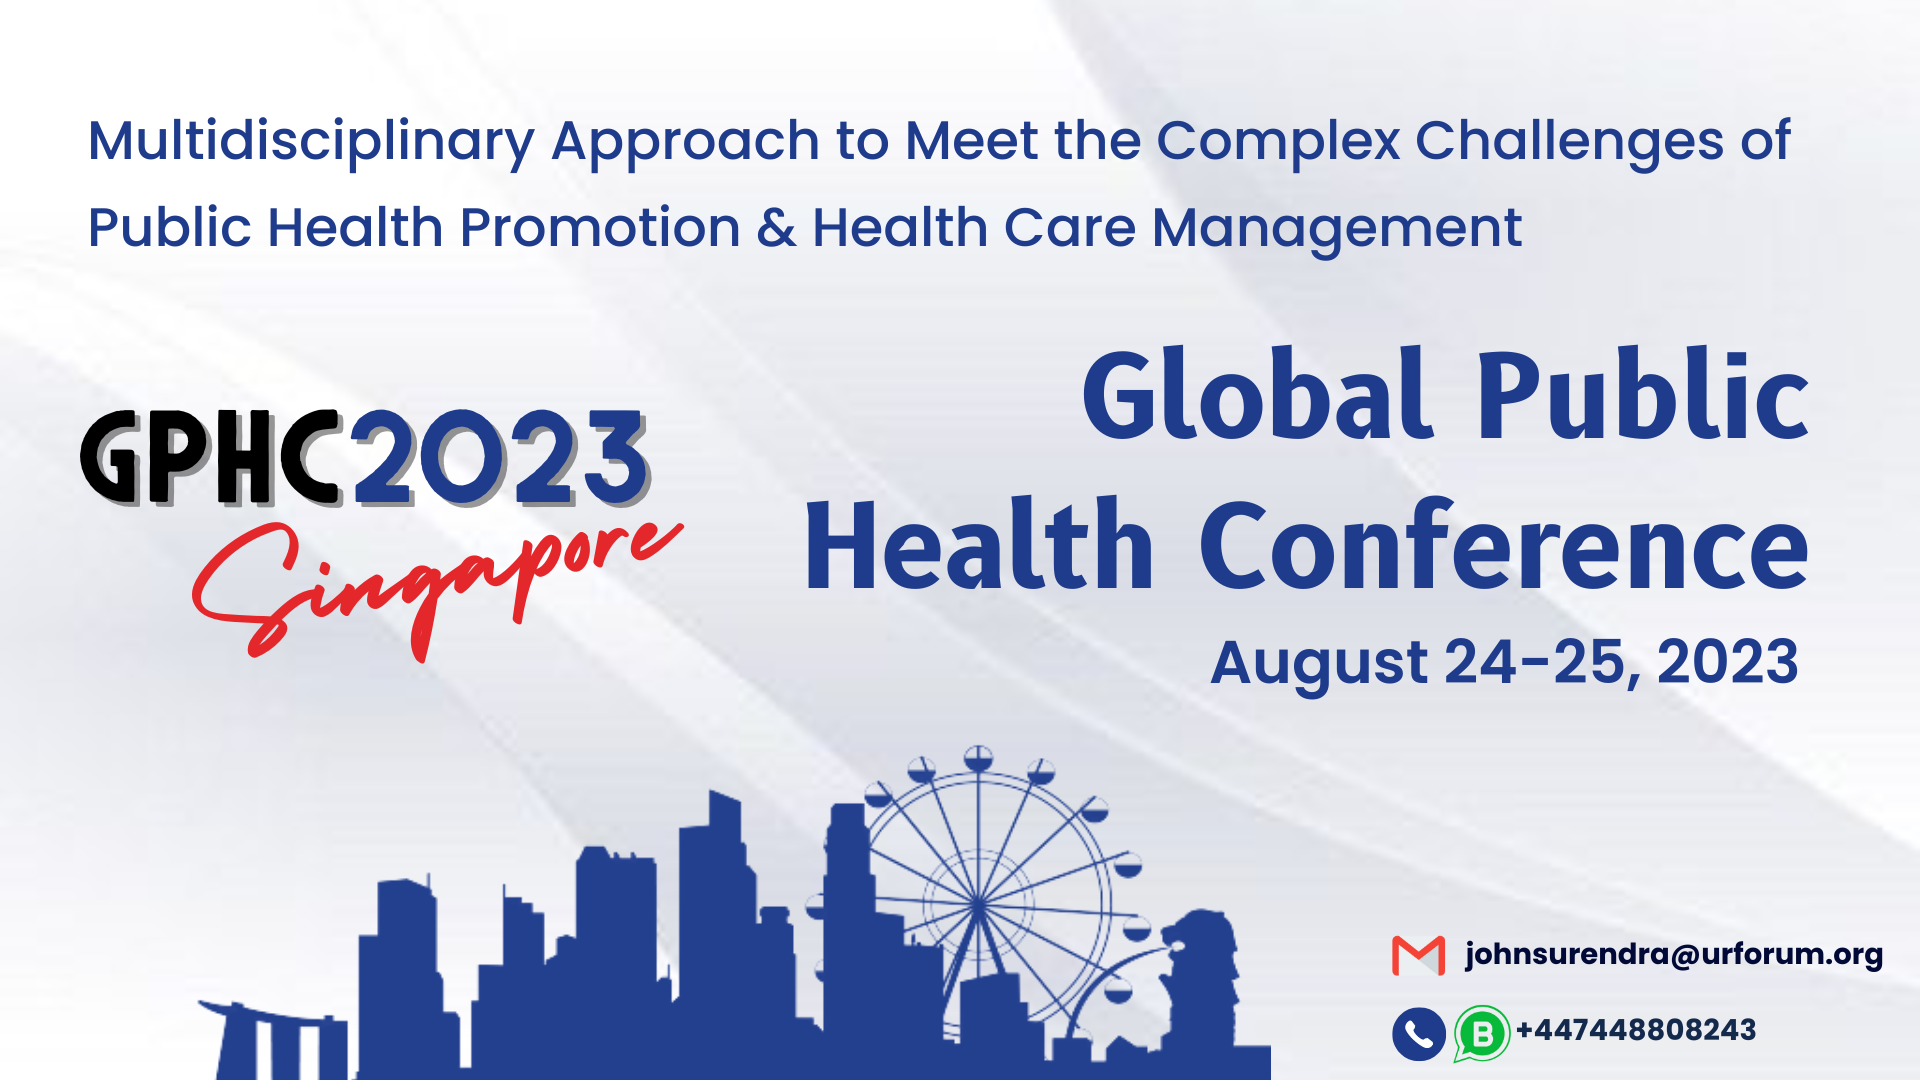 Global Public Health Conference, Singapore